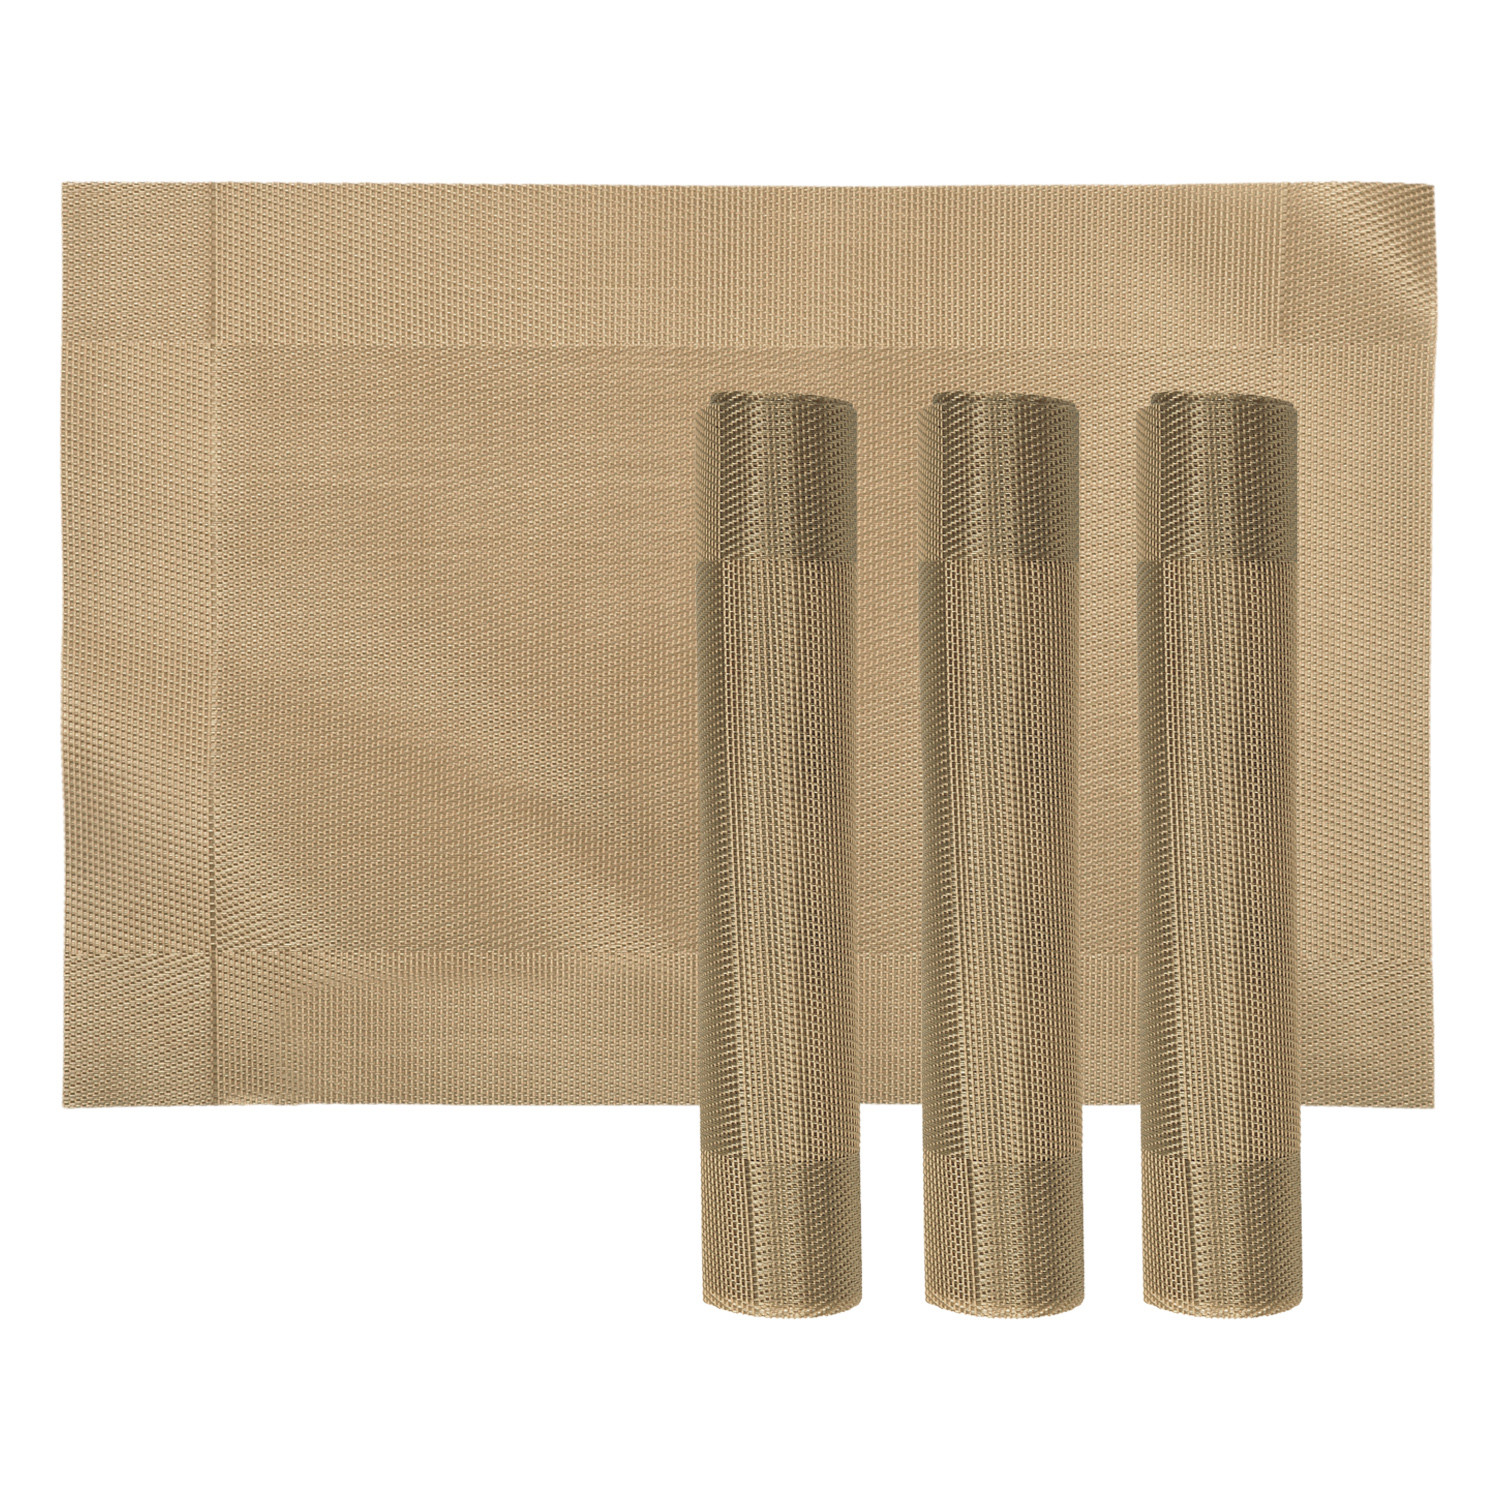 Kuber Industries Reversible Non-Slip Wipe Clean Heat Resistant PVC Placemats for Dining Table,(Light Brown)